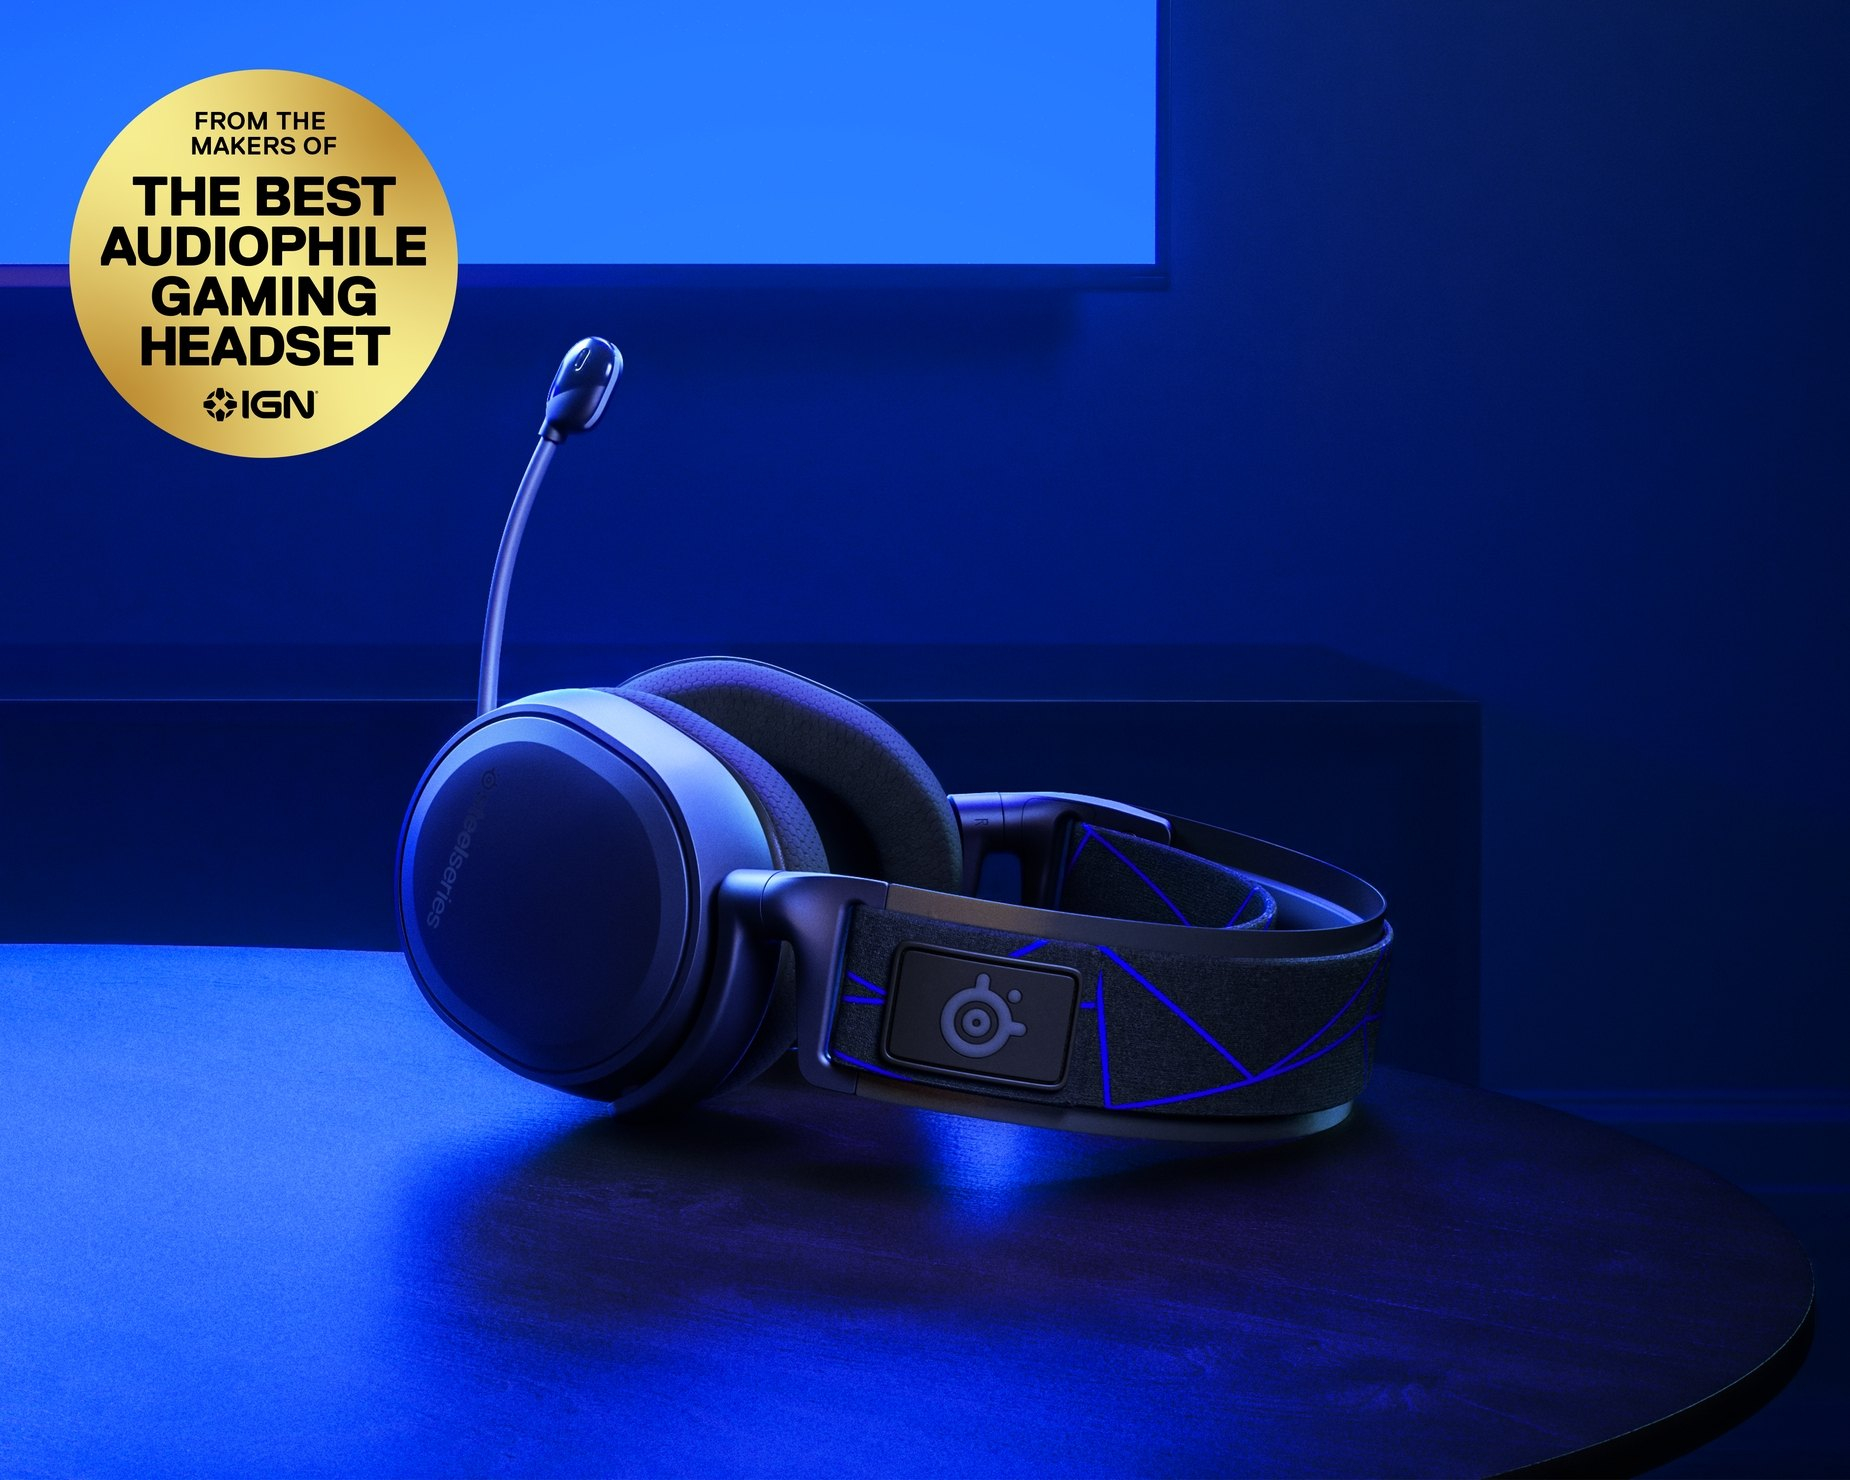 arctis 7x wireless gaming headset for xbox